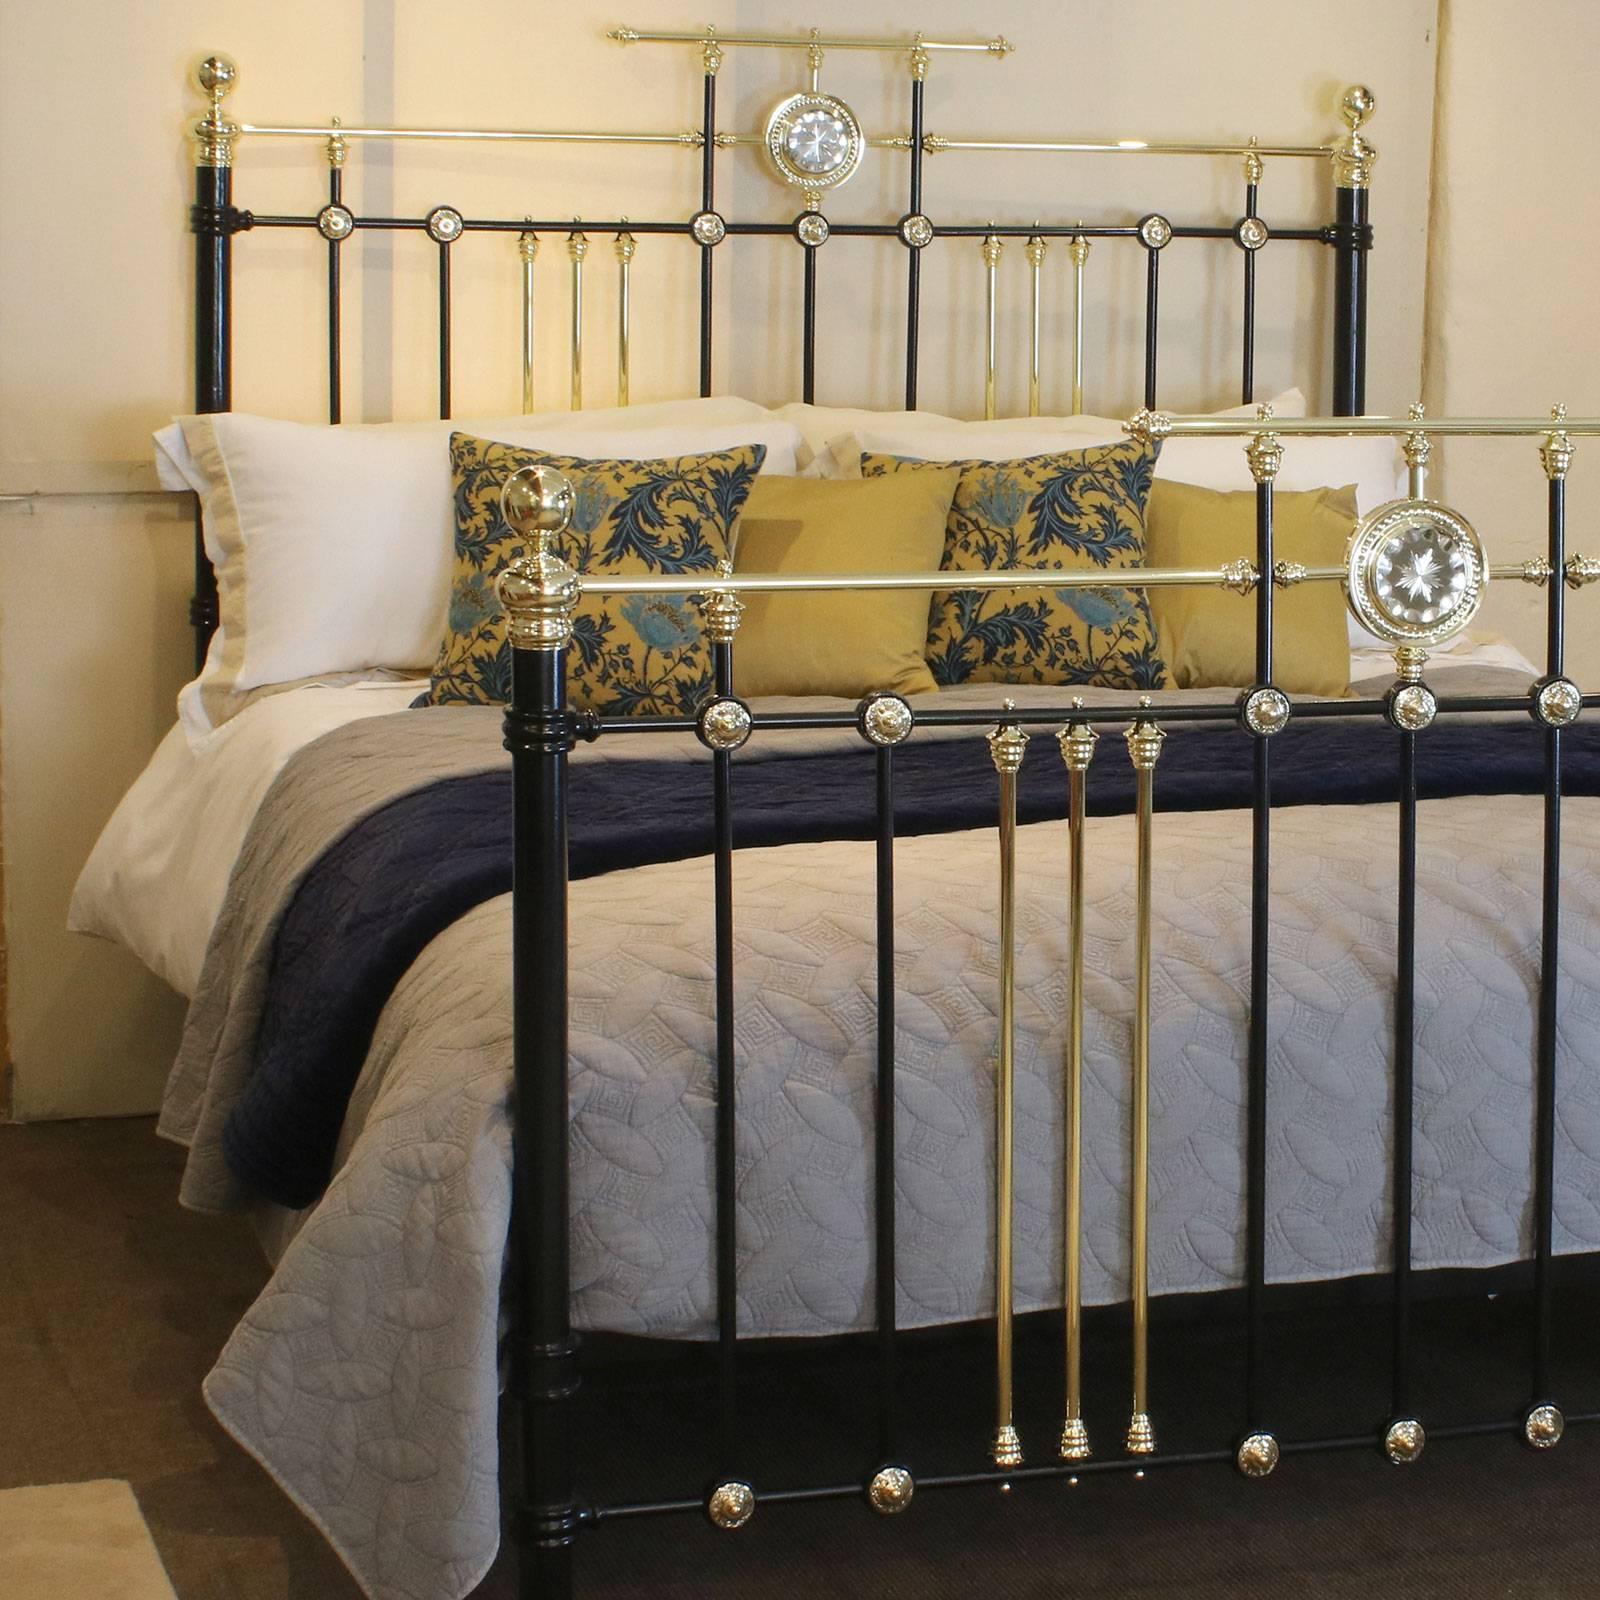 This unusual Gothic style bed has a attractive castings, superb central mirror decoration, brass rosettes and raised gallery rail on head and foot.

This bed accepts a British super king-size or California king-size base and mattress set (72